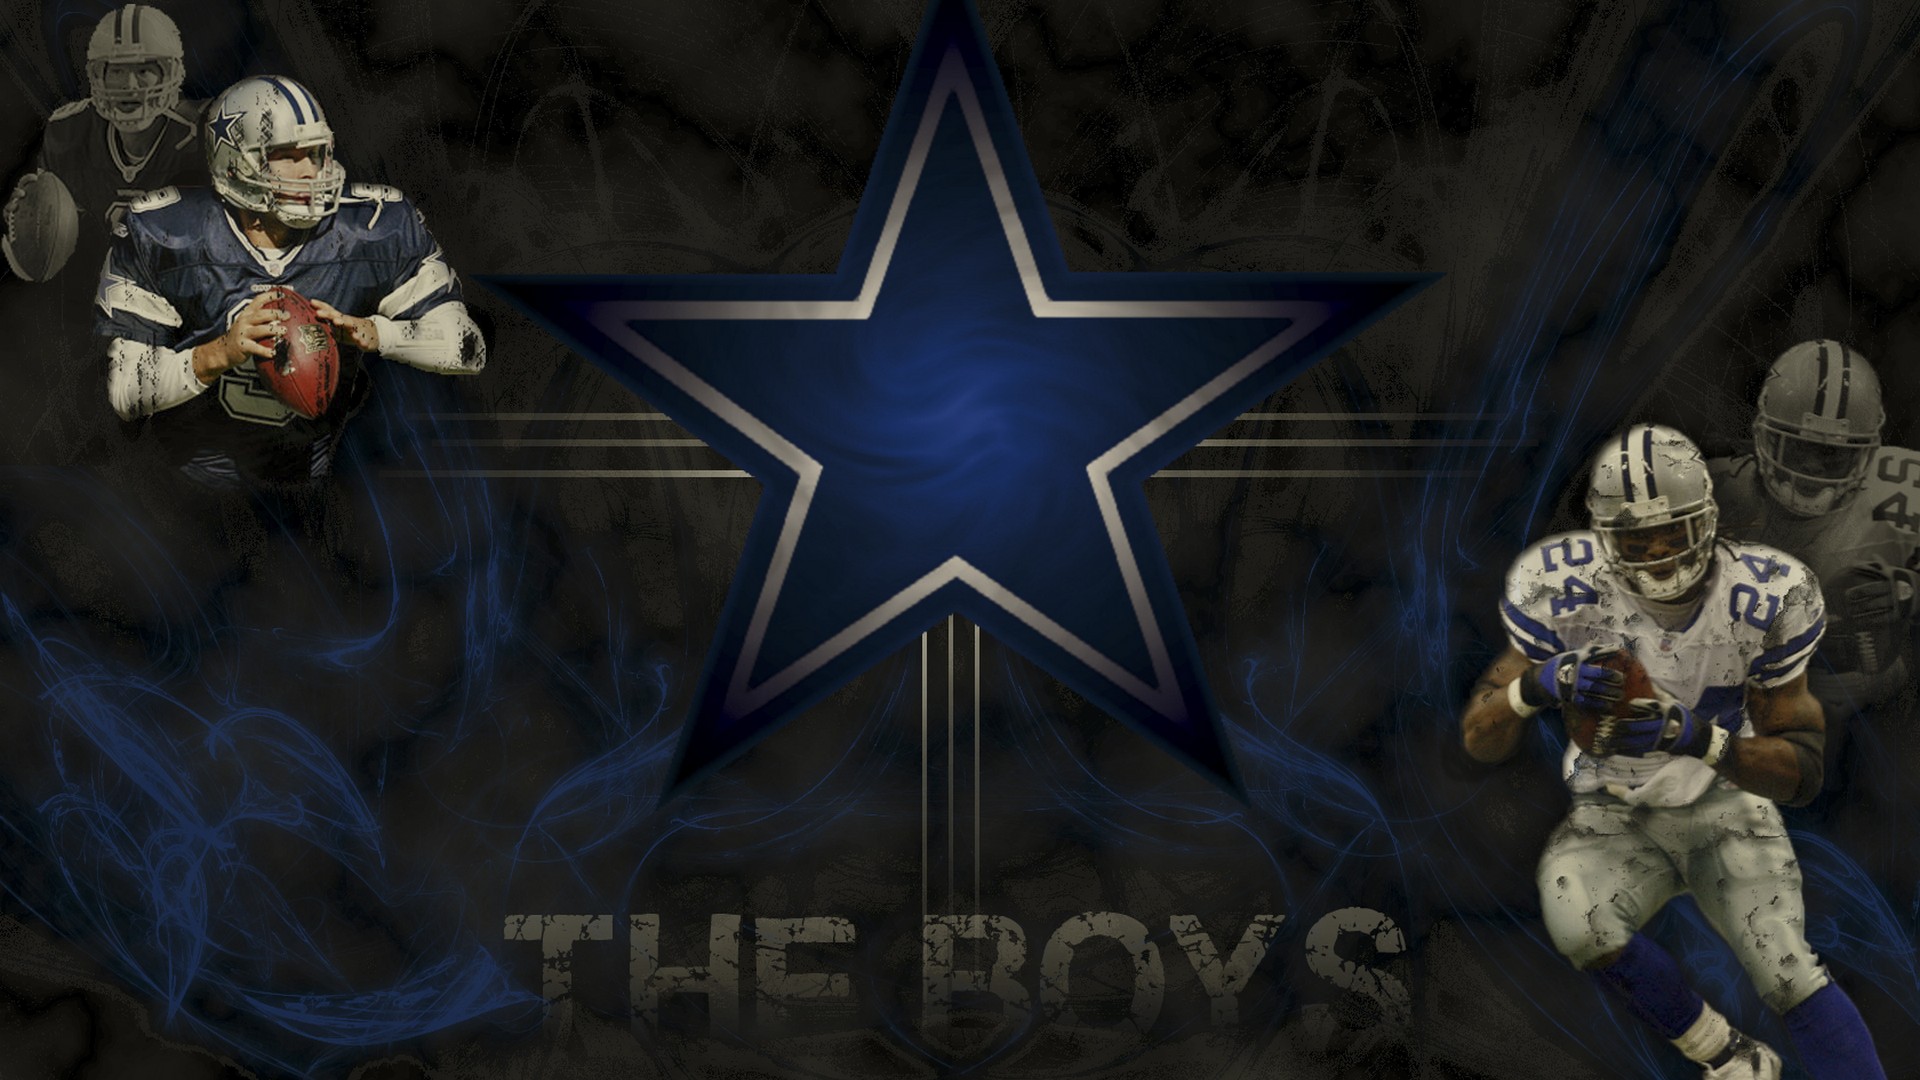 PC Wallpaper Dallas Cowboys With high-resolution 1920X1080 pixel. Download and set as wallpaper for Desktop Computer, Apple iPhone X, XS Max, XR, 8, 7, 6, SE, iPad, Android